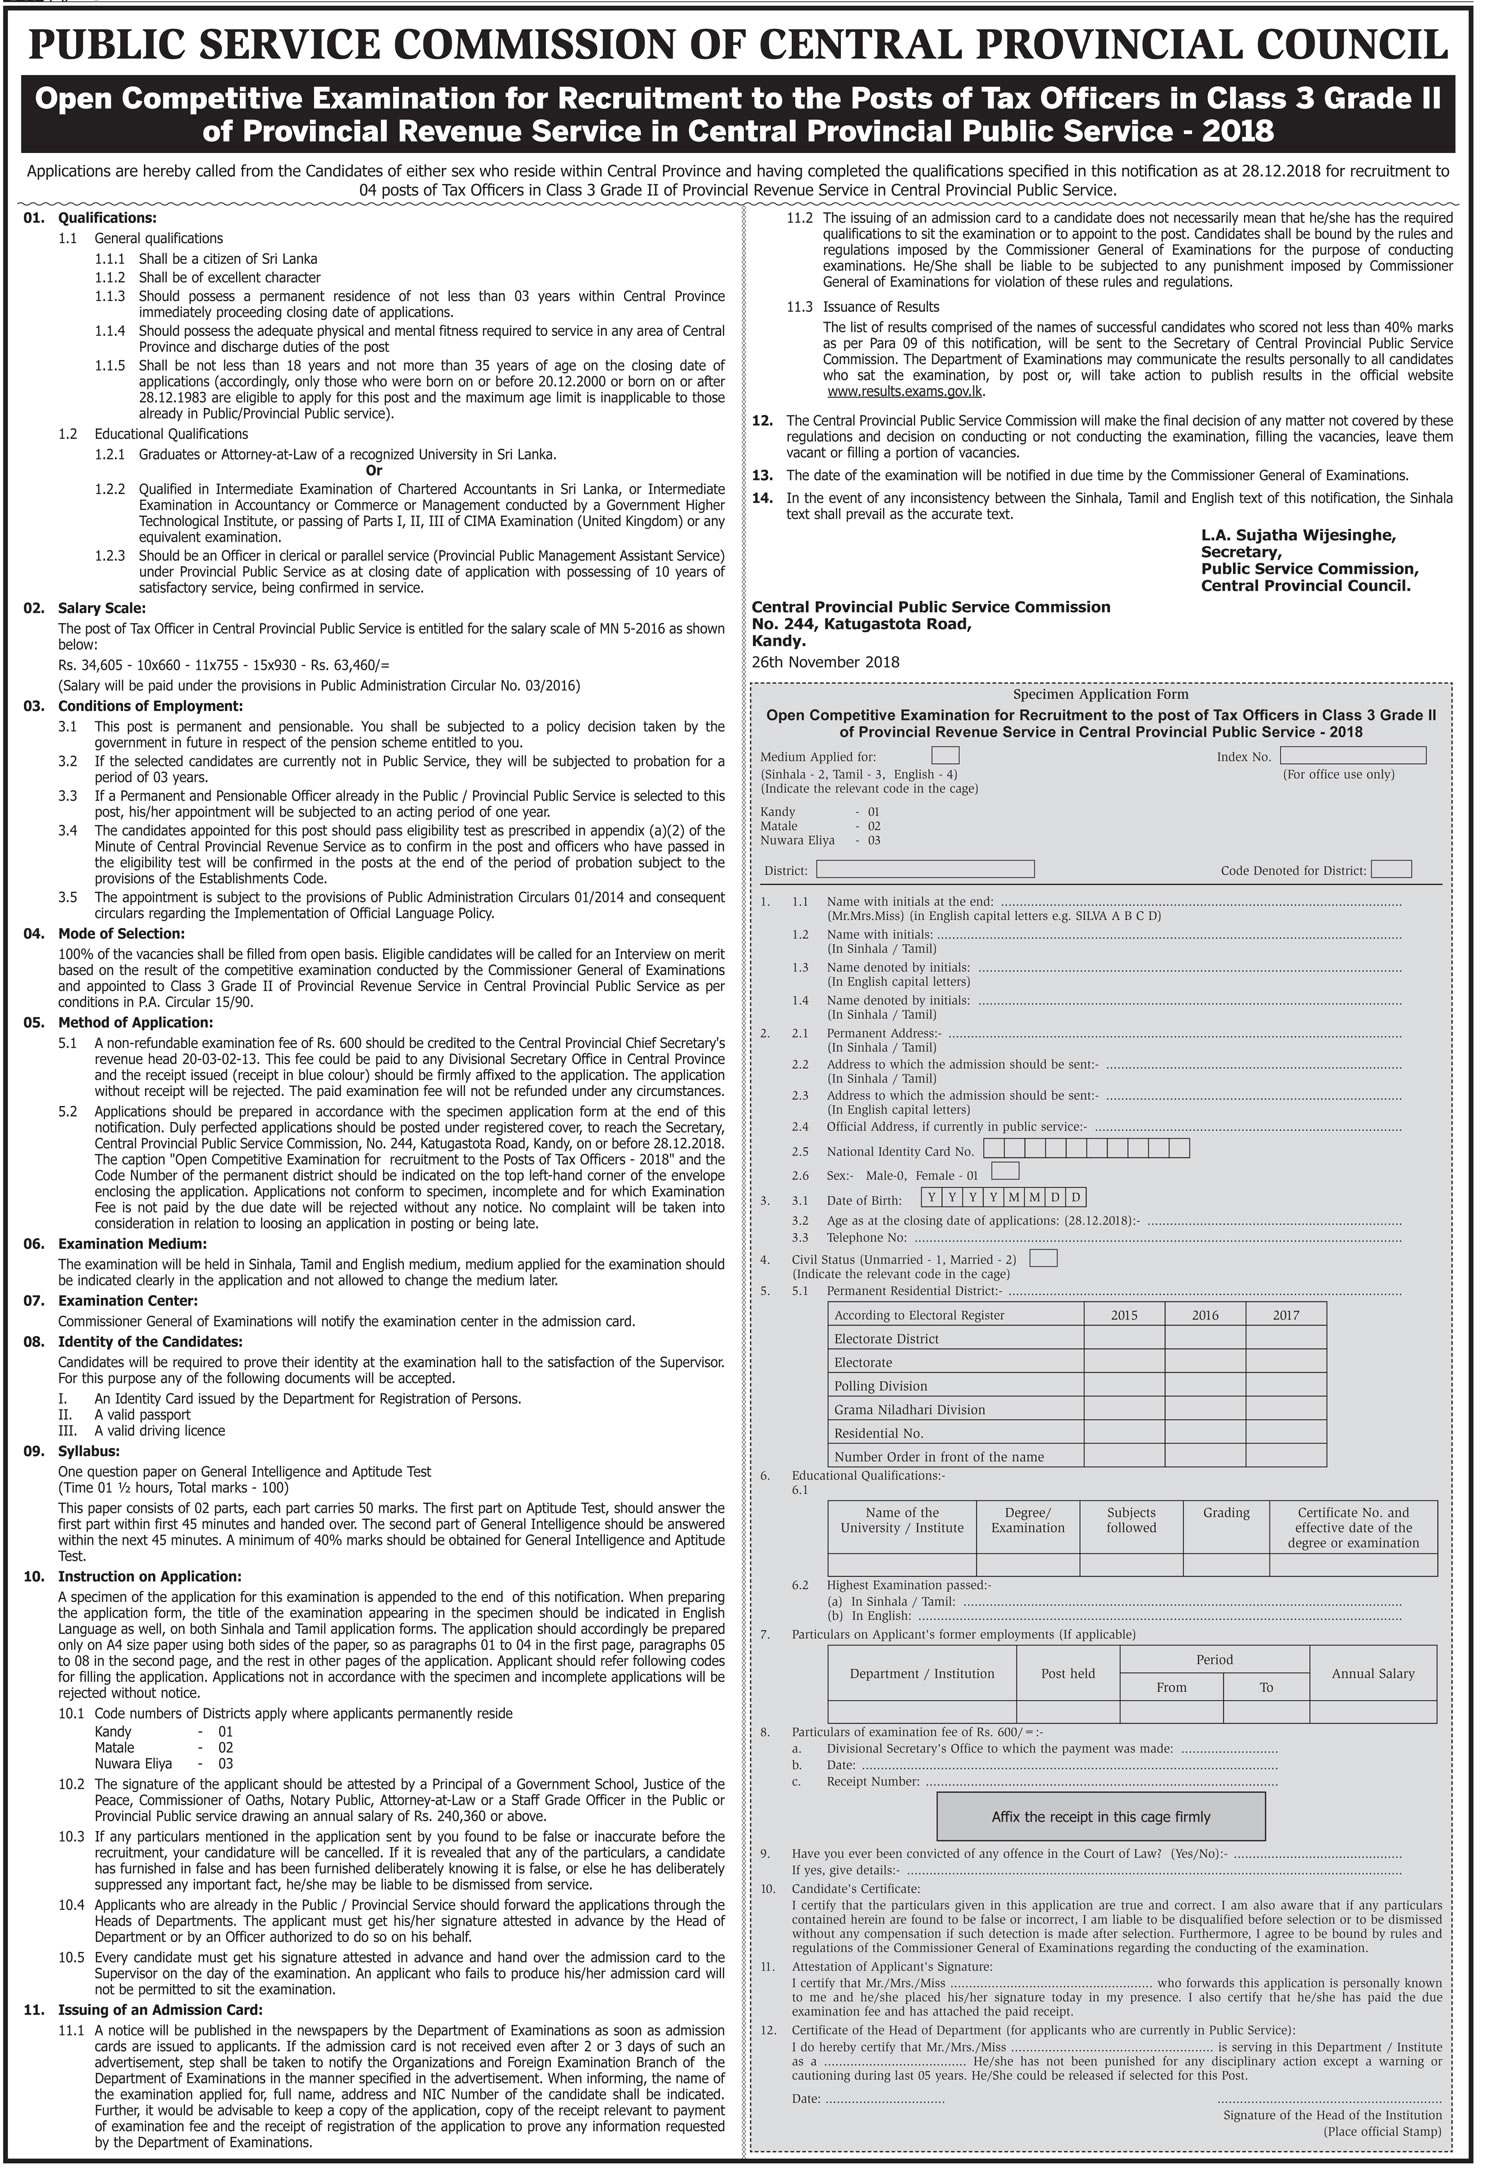 North Central Provincial Public Service Tax Officer (Open Exam)